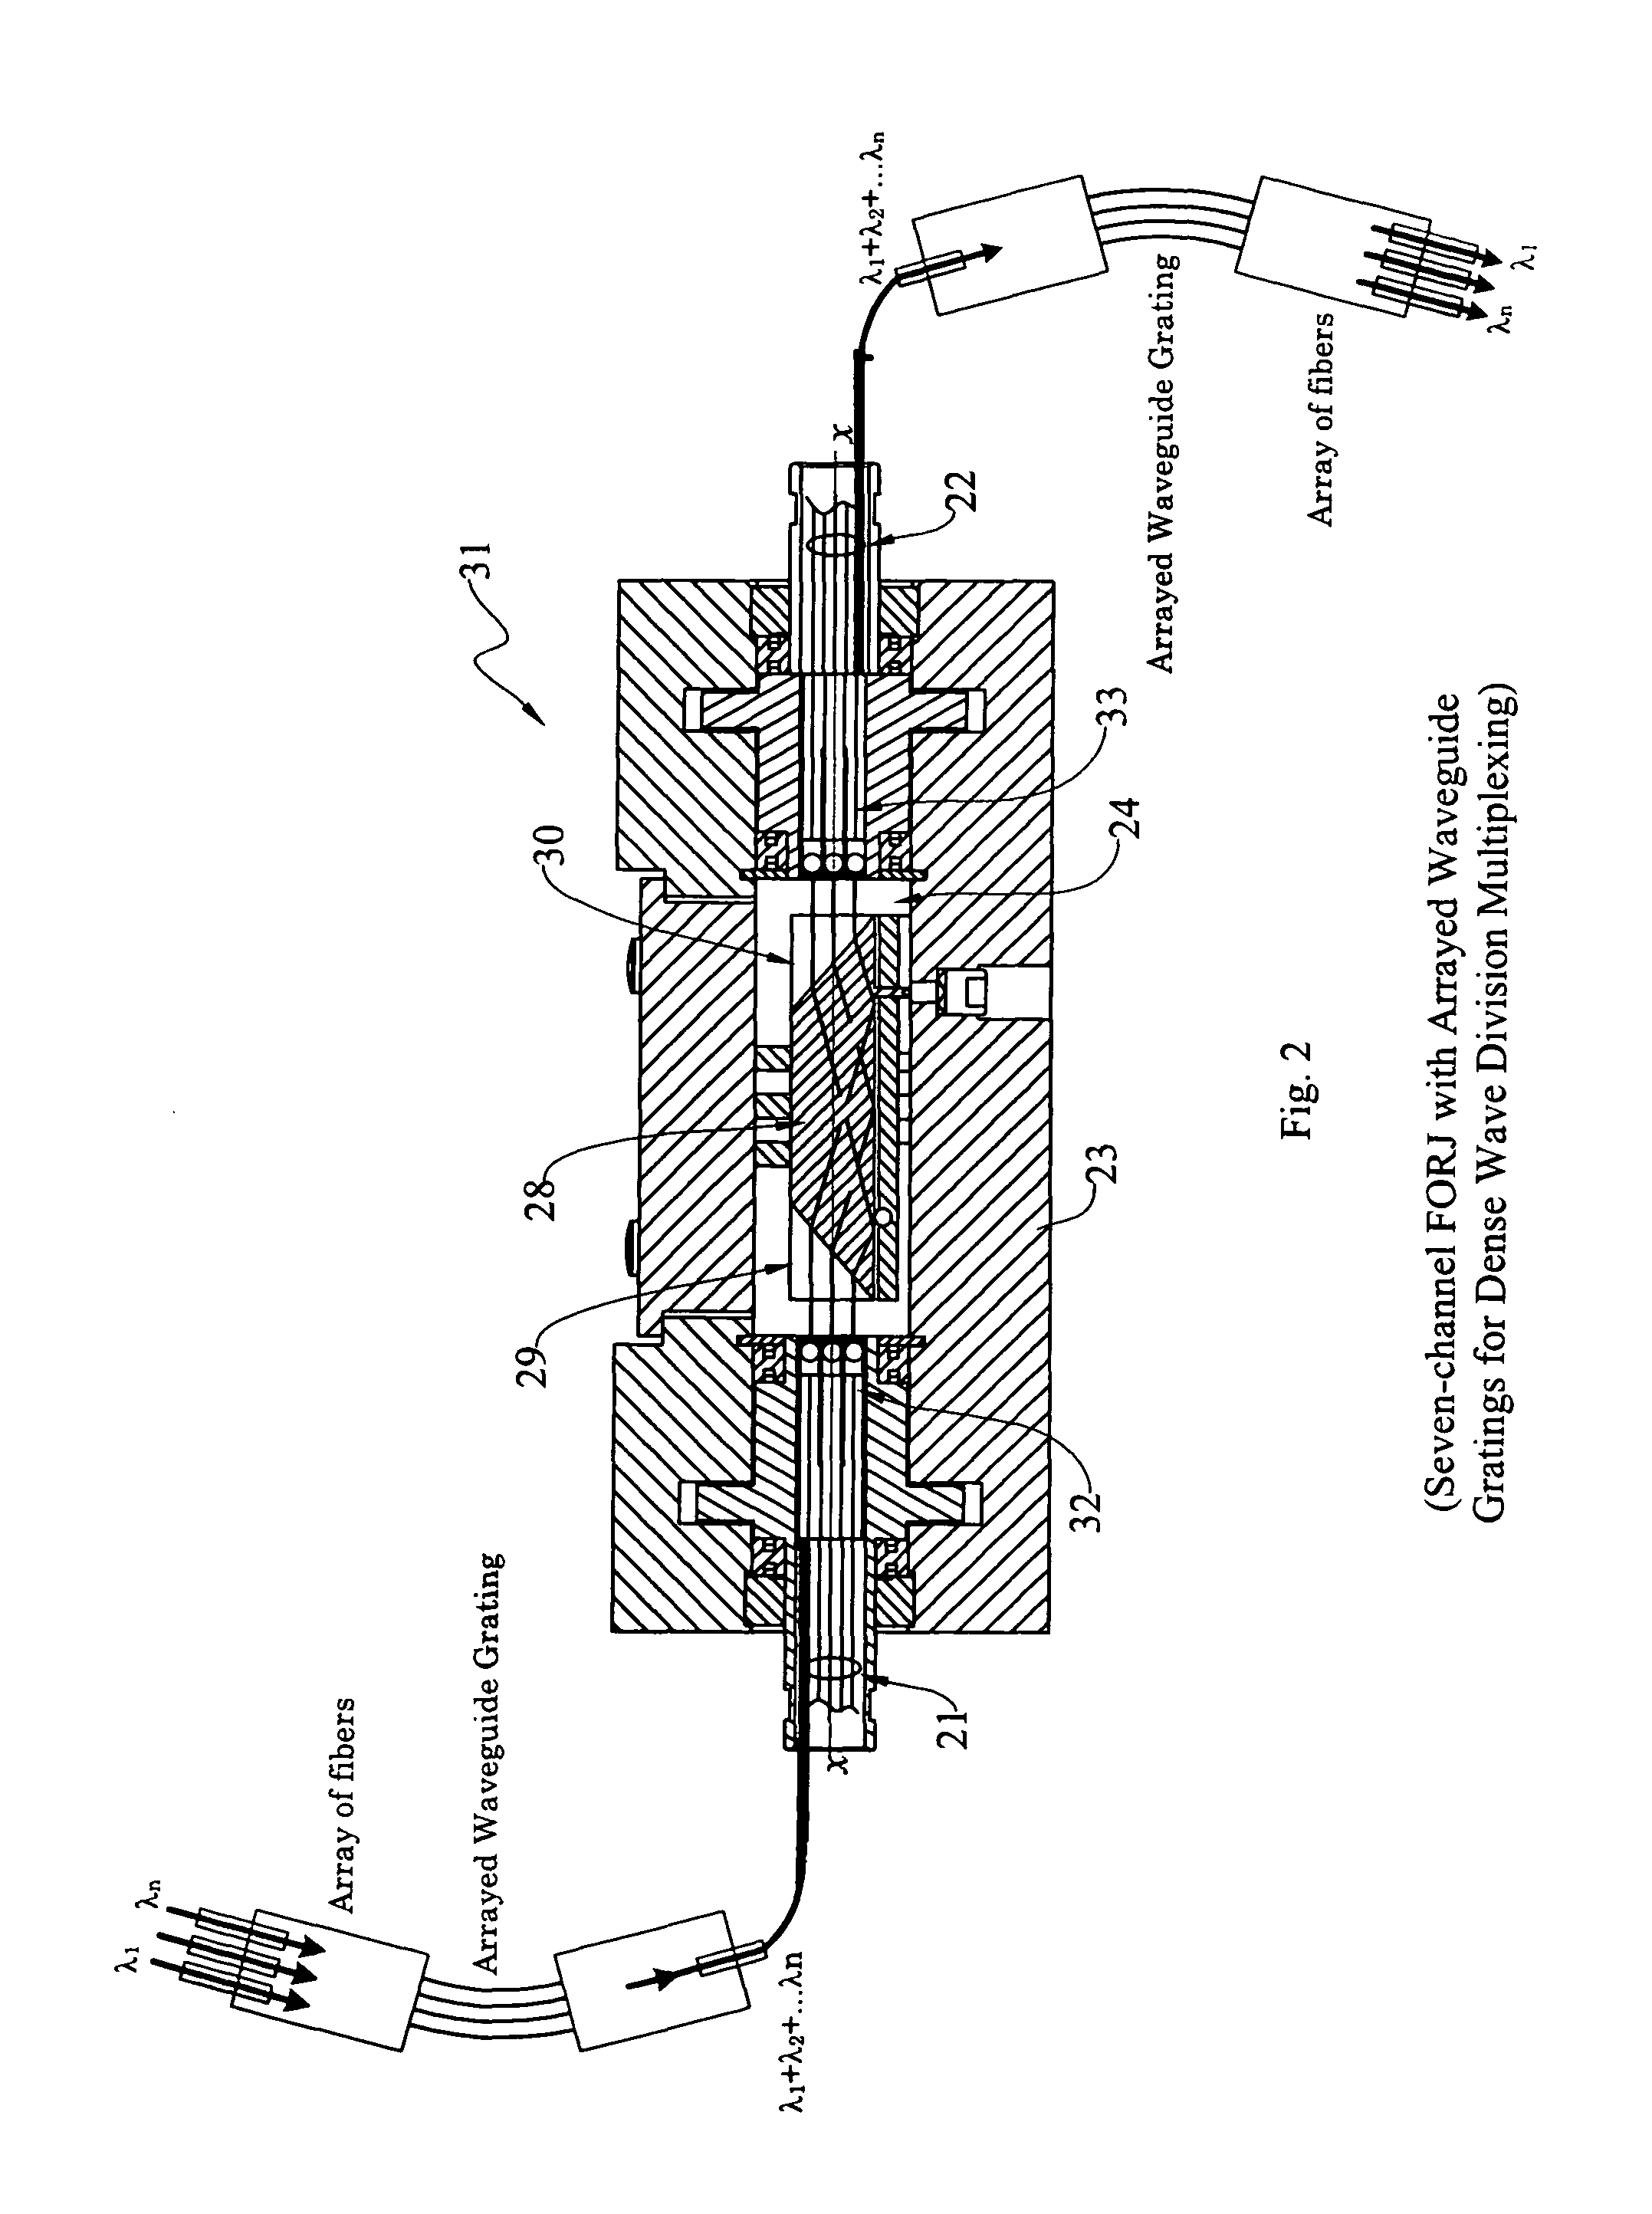 High-power collimating lens assemblies, and methods of reducing the optical power density in collimating lens assemblies